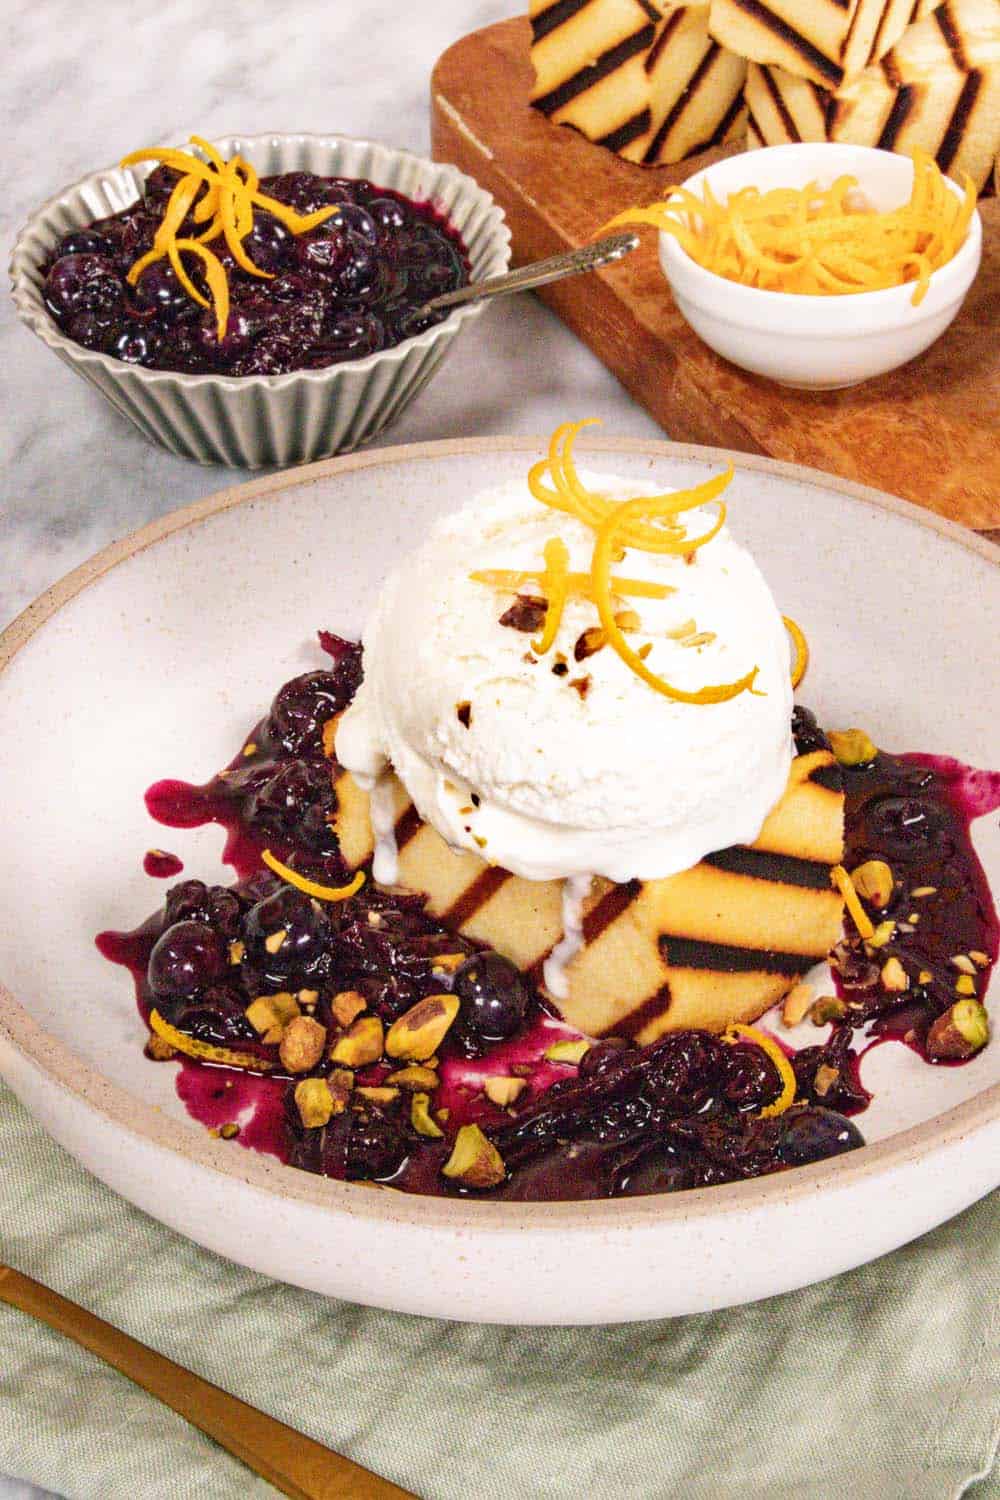 How To Make Blueberry Compote Two Ways